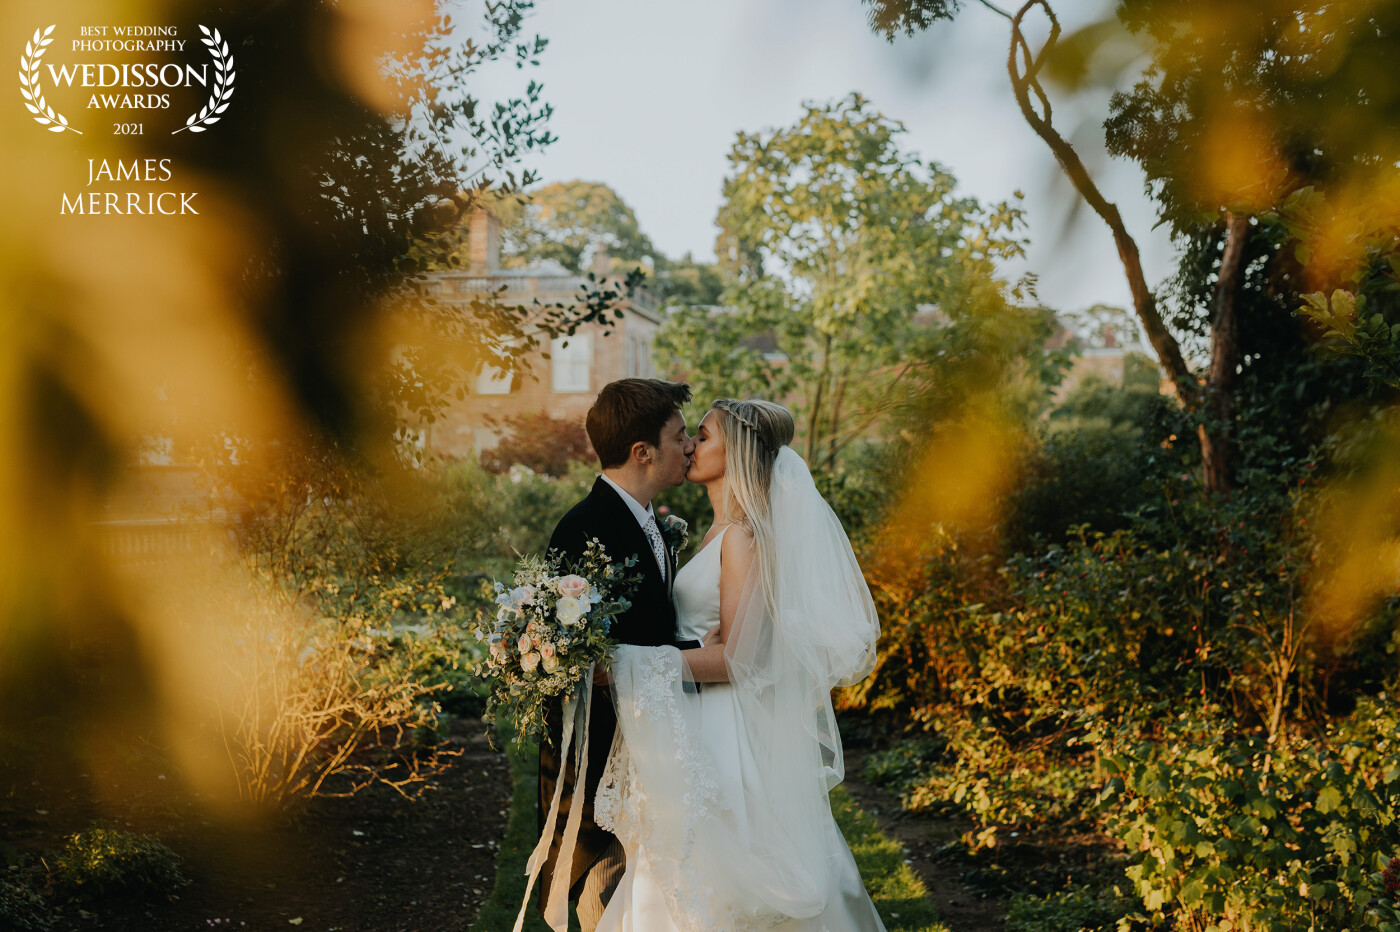 This photo of Richard & Emily was taken within the incredible grounds at Weston Park, Staffordshire in the UK. Their wedding was mid September and golden hour fell at the perfect time! The trees were beginning to turn for Autumn, and coupled with the amazing golden light, shooting through the trees, this image fell into place perfectly!